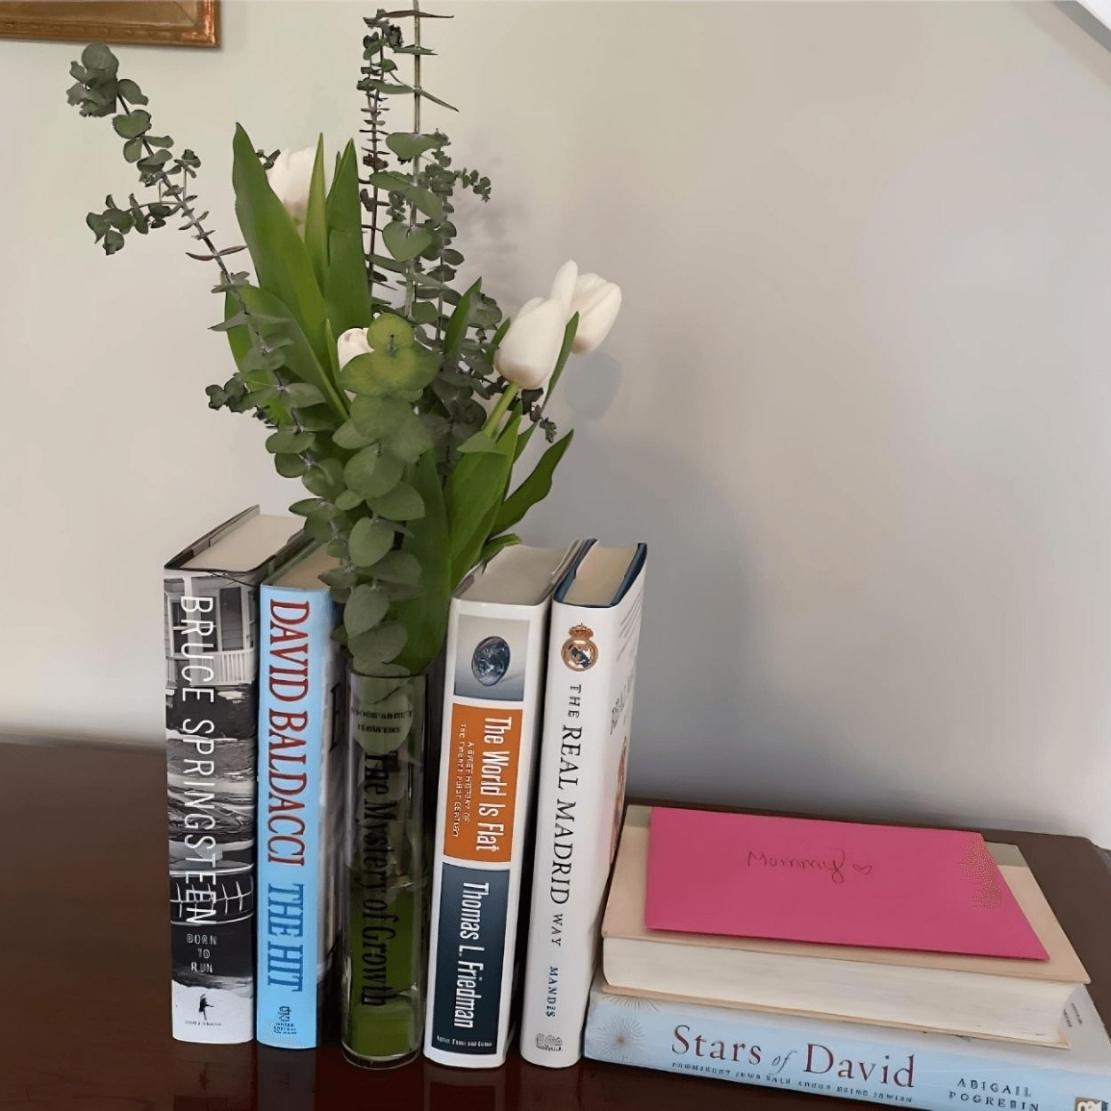 Stacked books and acrylic book vase with text and green flowers